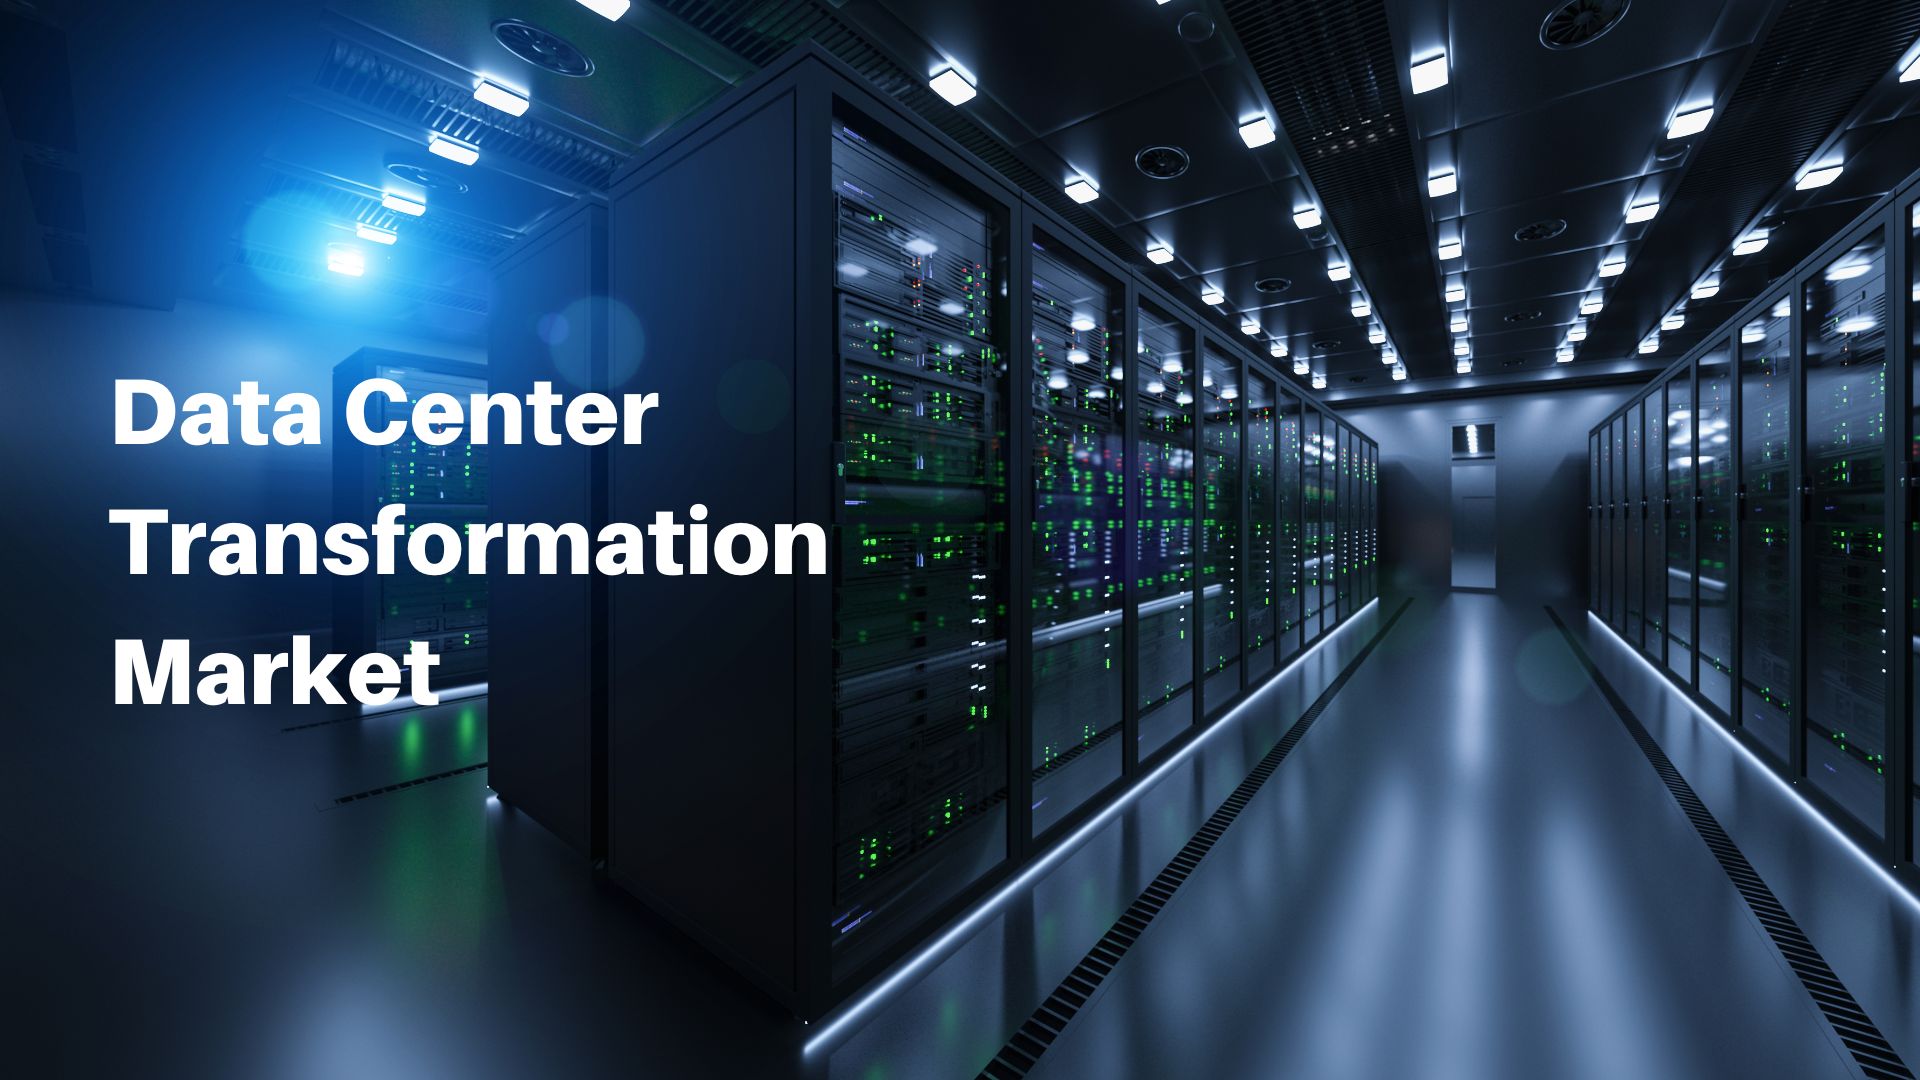 Data Center Transformation Market Size will Observe Substantial Growth by 2032 with a CAGR of 13.2%